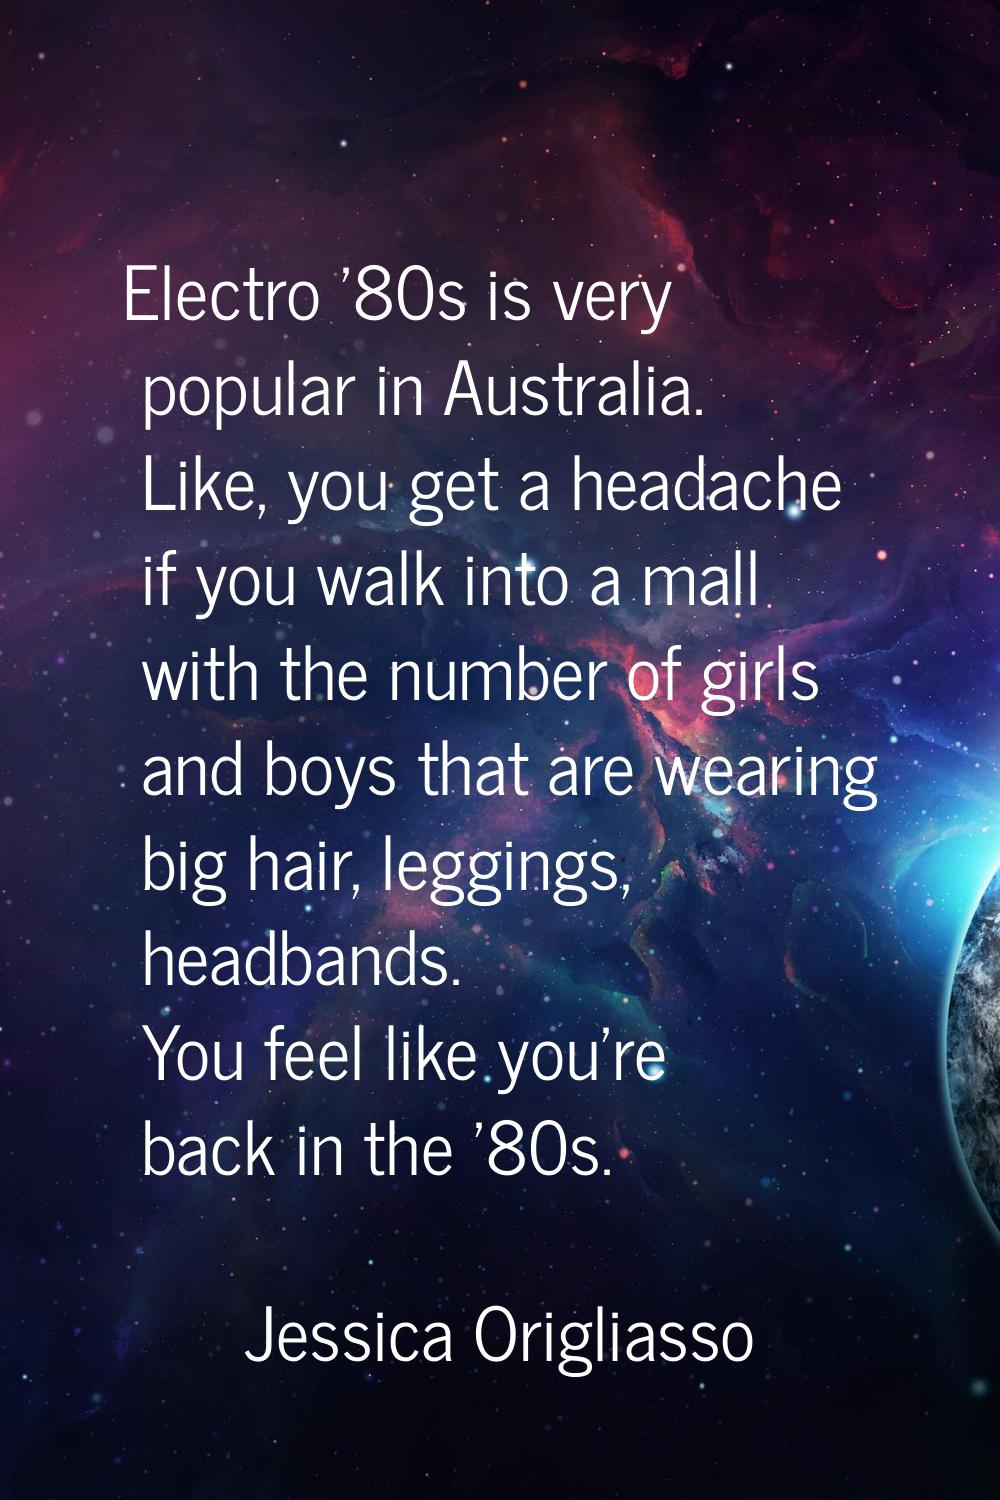 Electro '80s is very popular in Australia. Like, you get a headache if you walk into a mall with th